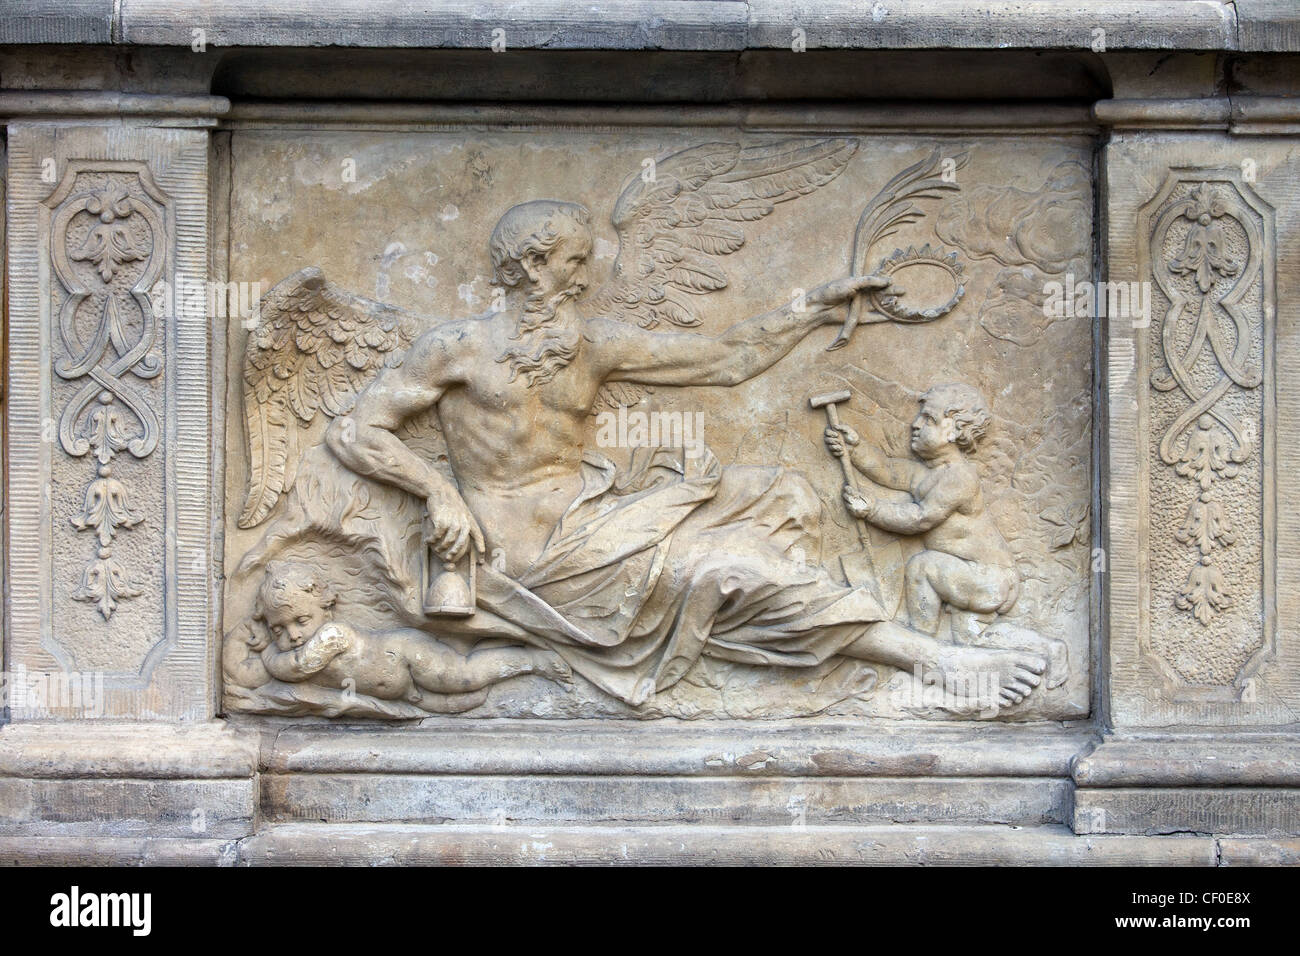 18th century bas-relief of the Chronos (God in Greek mythology, personification of Time) on the historic tenement house terrace. Stock Photo